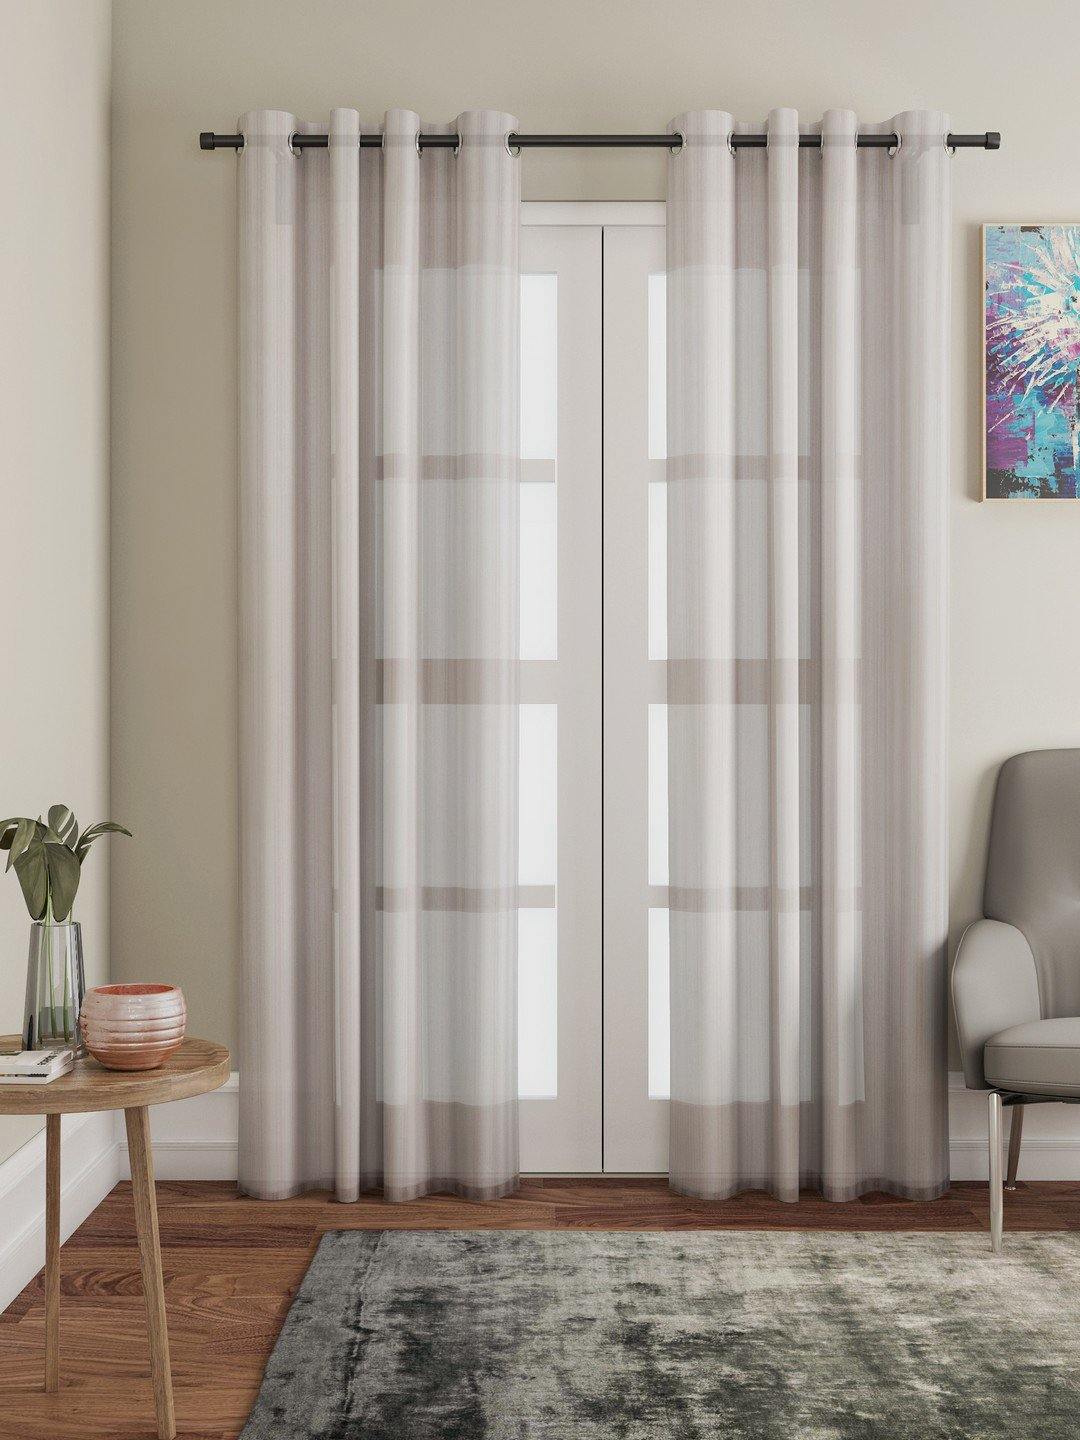 Lushomes Brown Design 2 Melody Sheer Door Curtains 4.5 Ft x 7.5 ft. (54" x 90‰۝, Single pc) - Lushomes